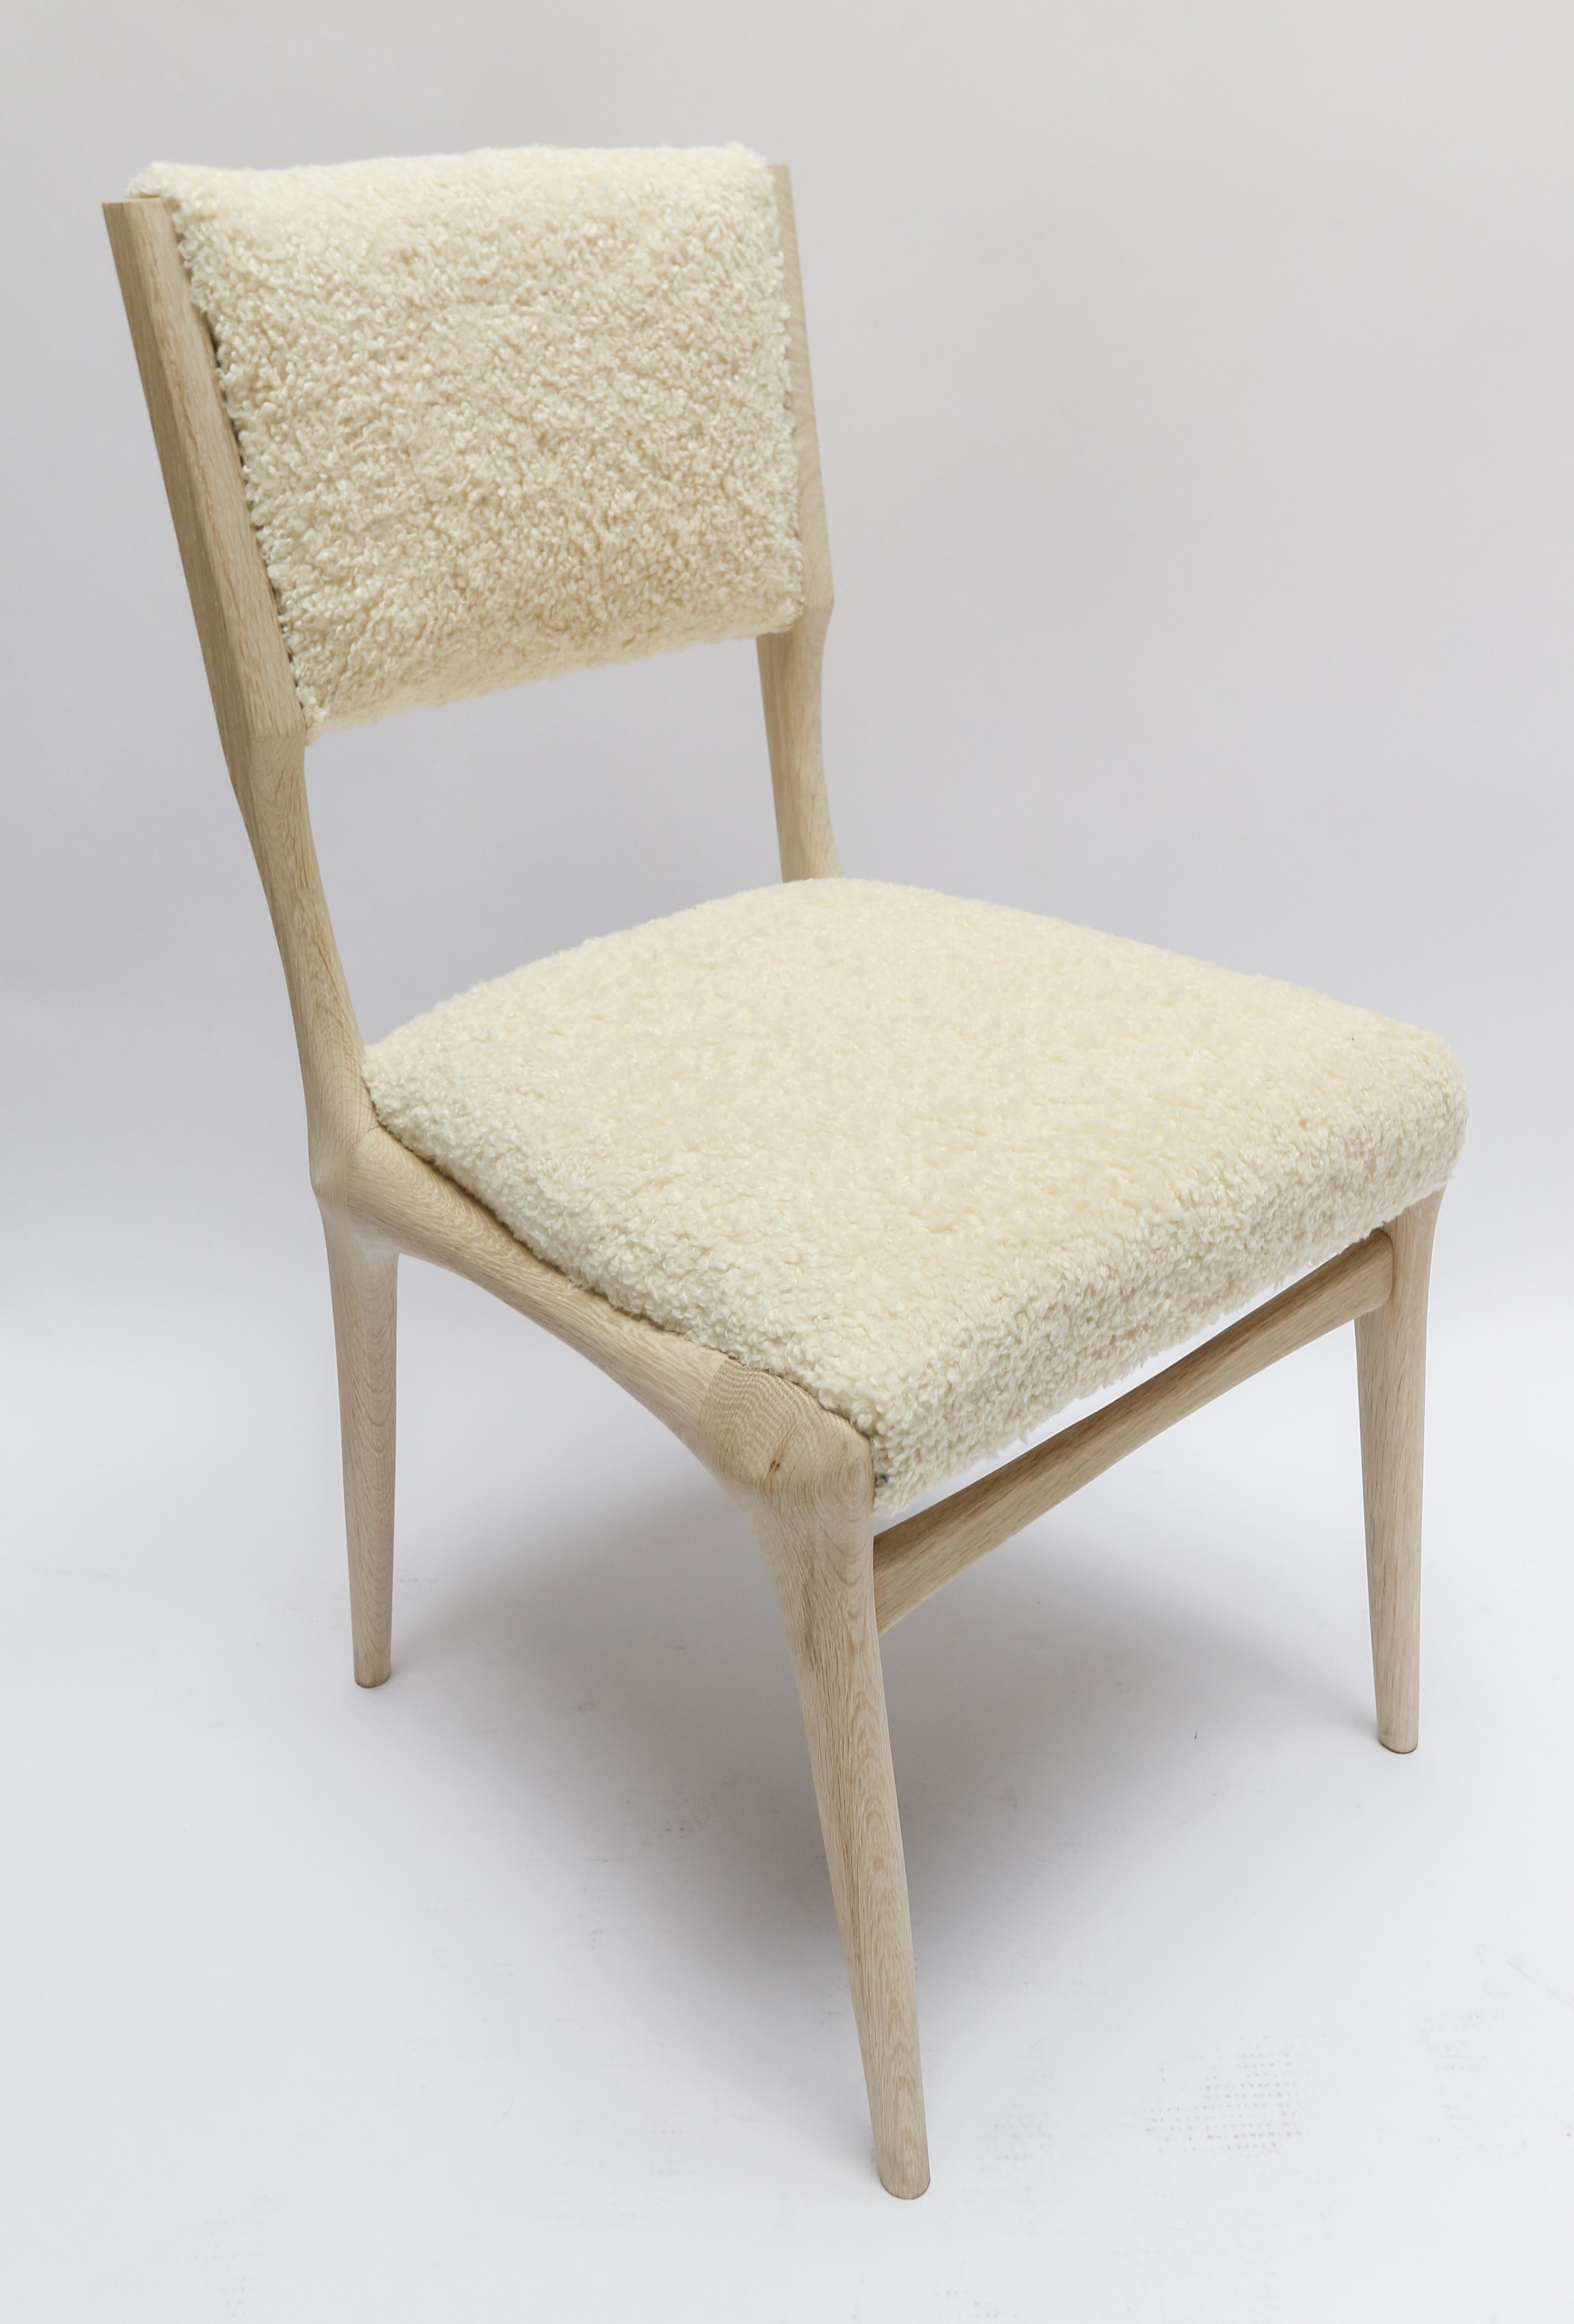 Custom midcentury style dining chair in ivory bouclé. Made in Los Angeles of American oak.  Can be done in different wood and fabrics.